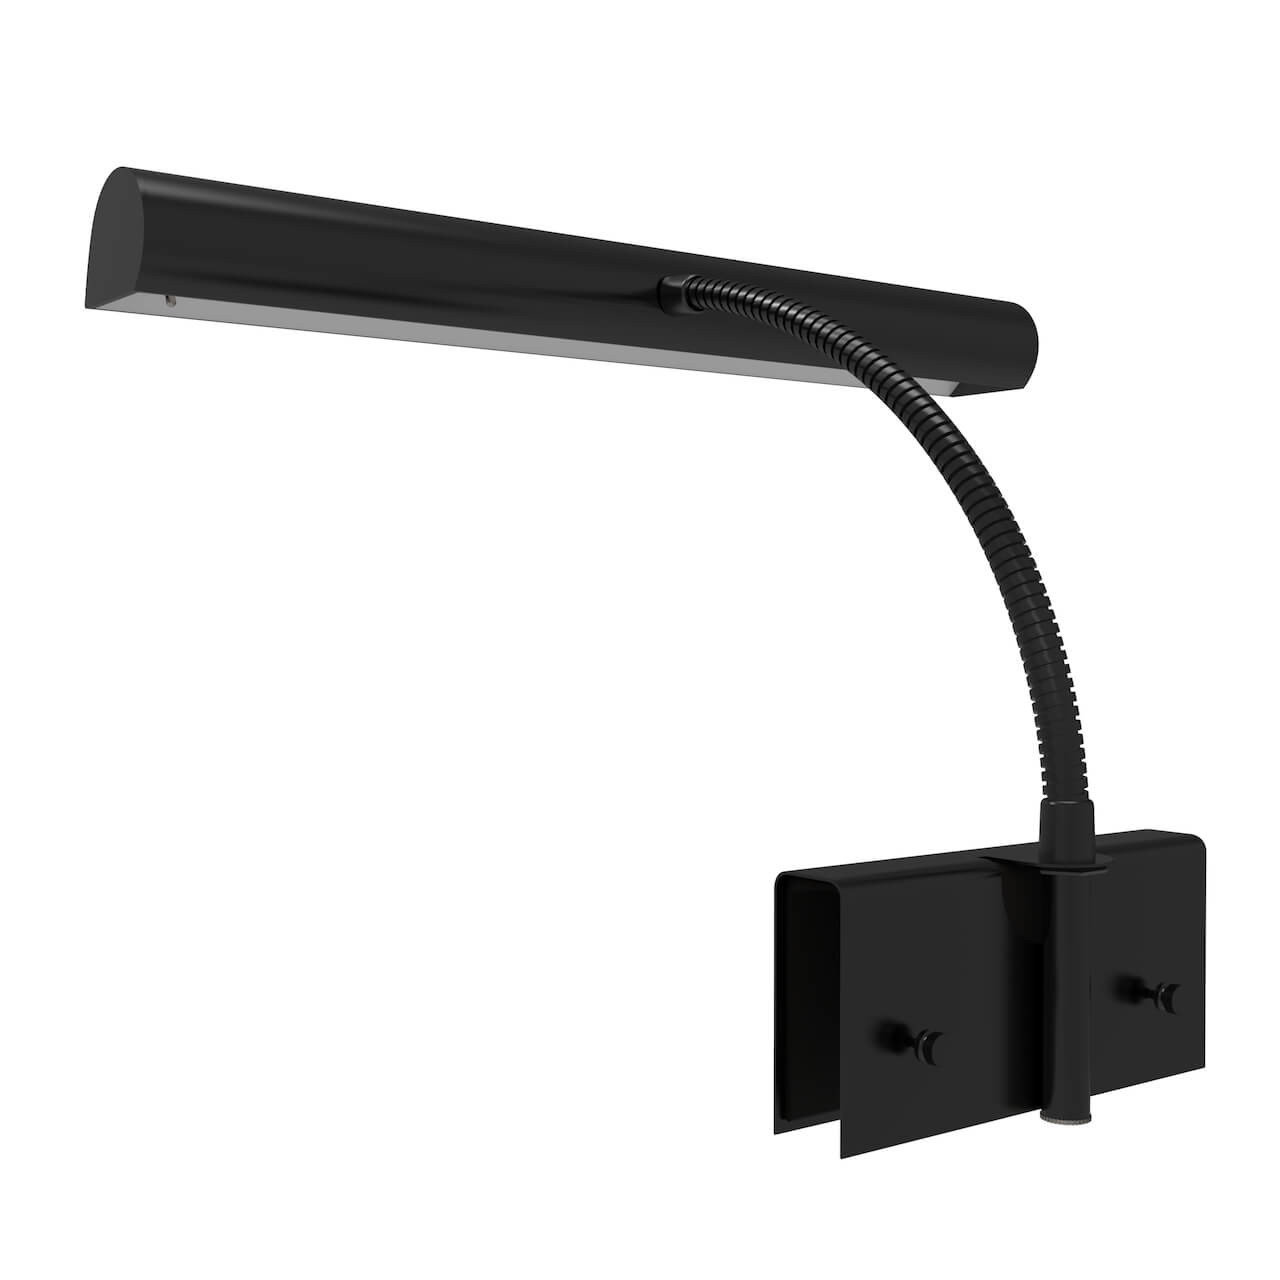 Gooseneck Piano Light with LED that Steinway technology most fits